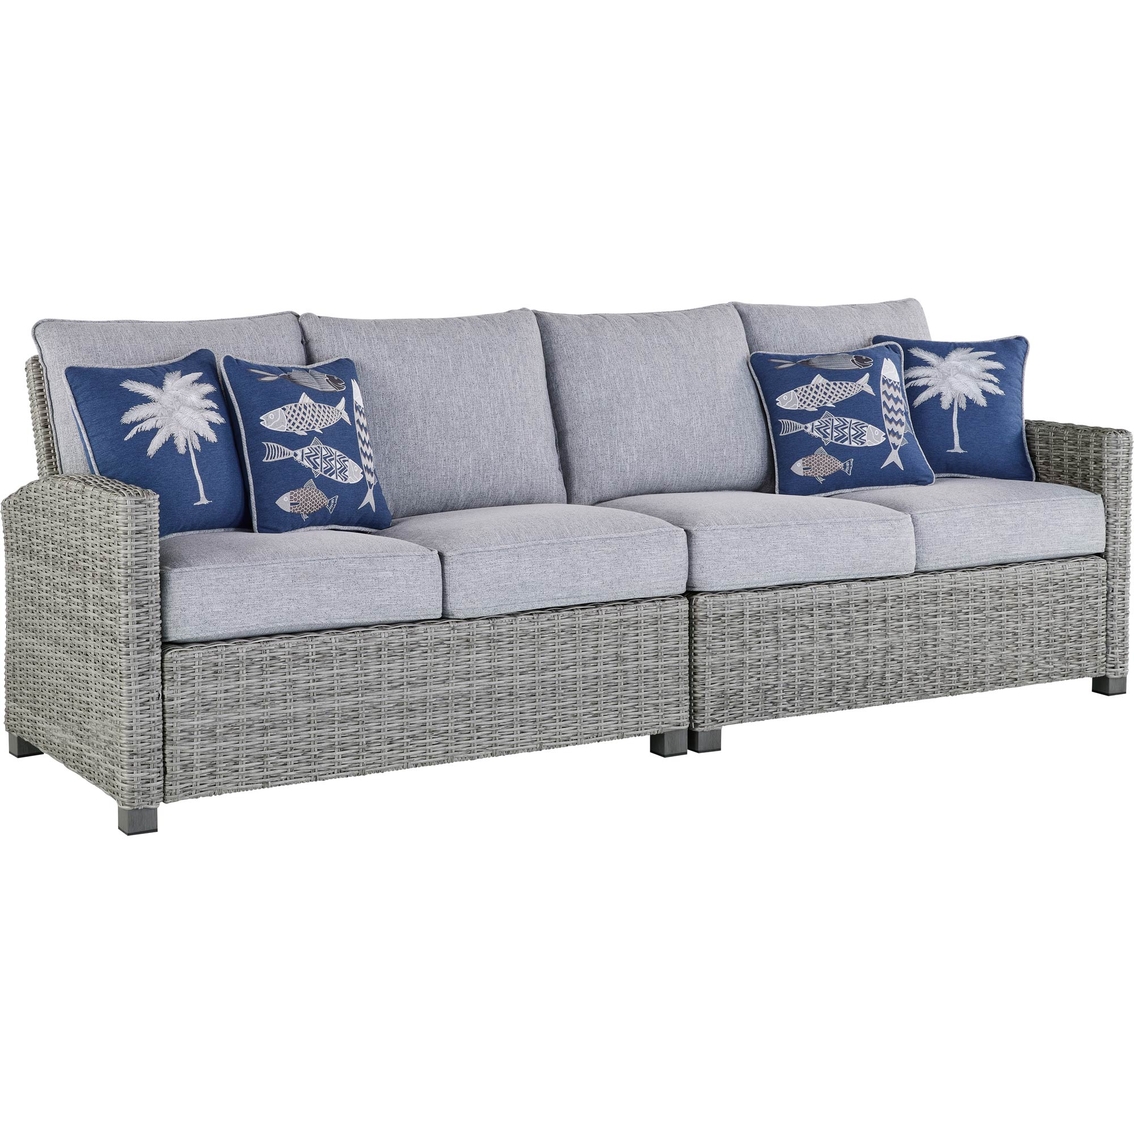 Signature Design by Ashley Naples Beach Outdoor 4 pc. Sectional - Image 2 of 10